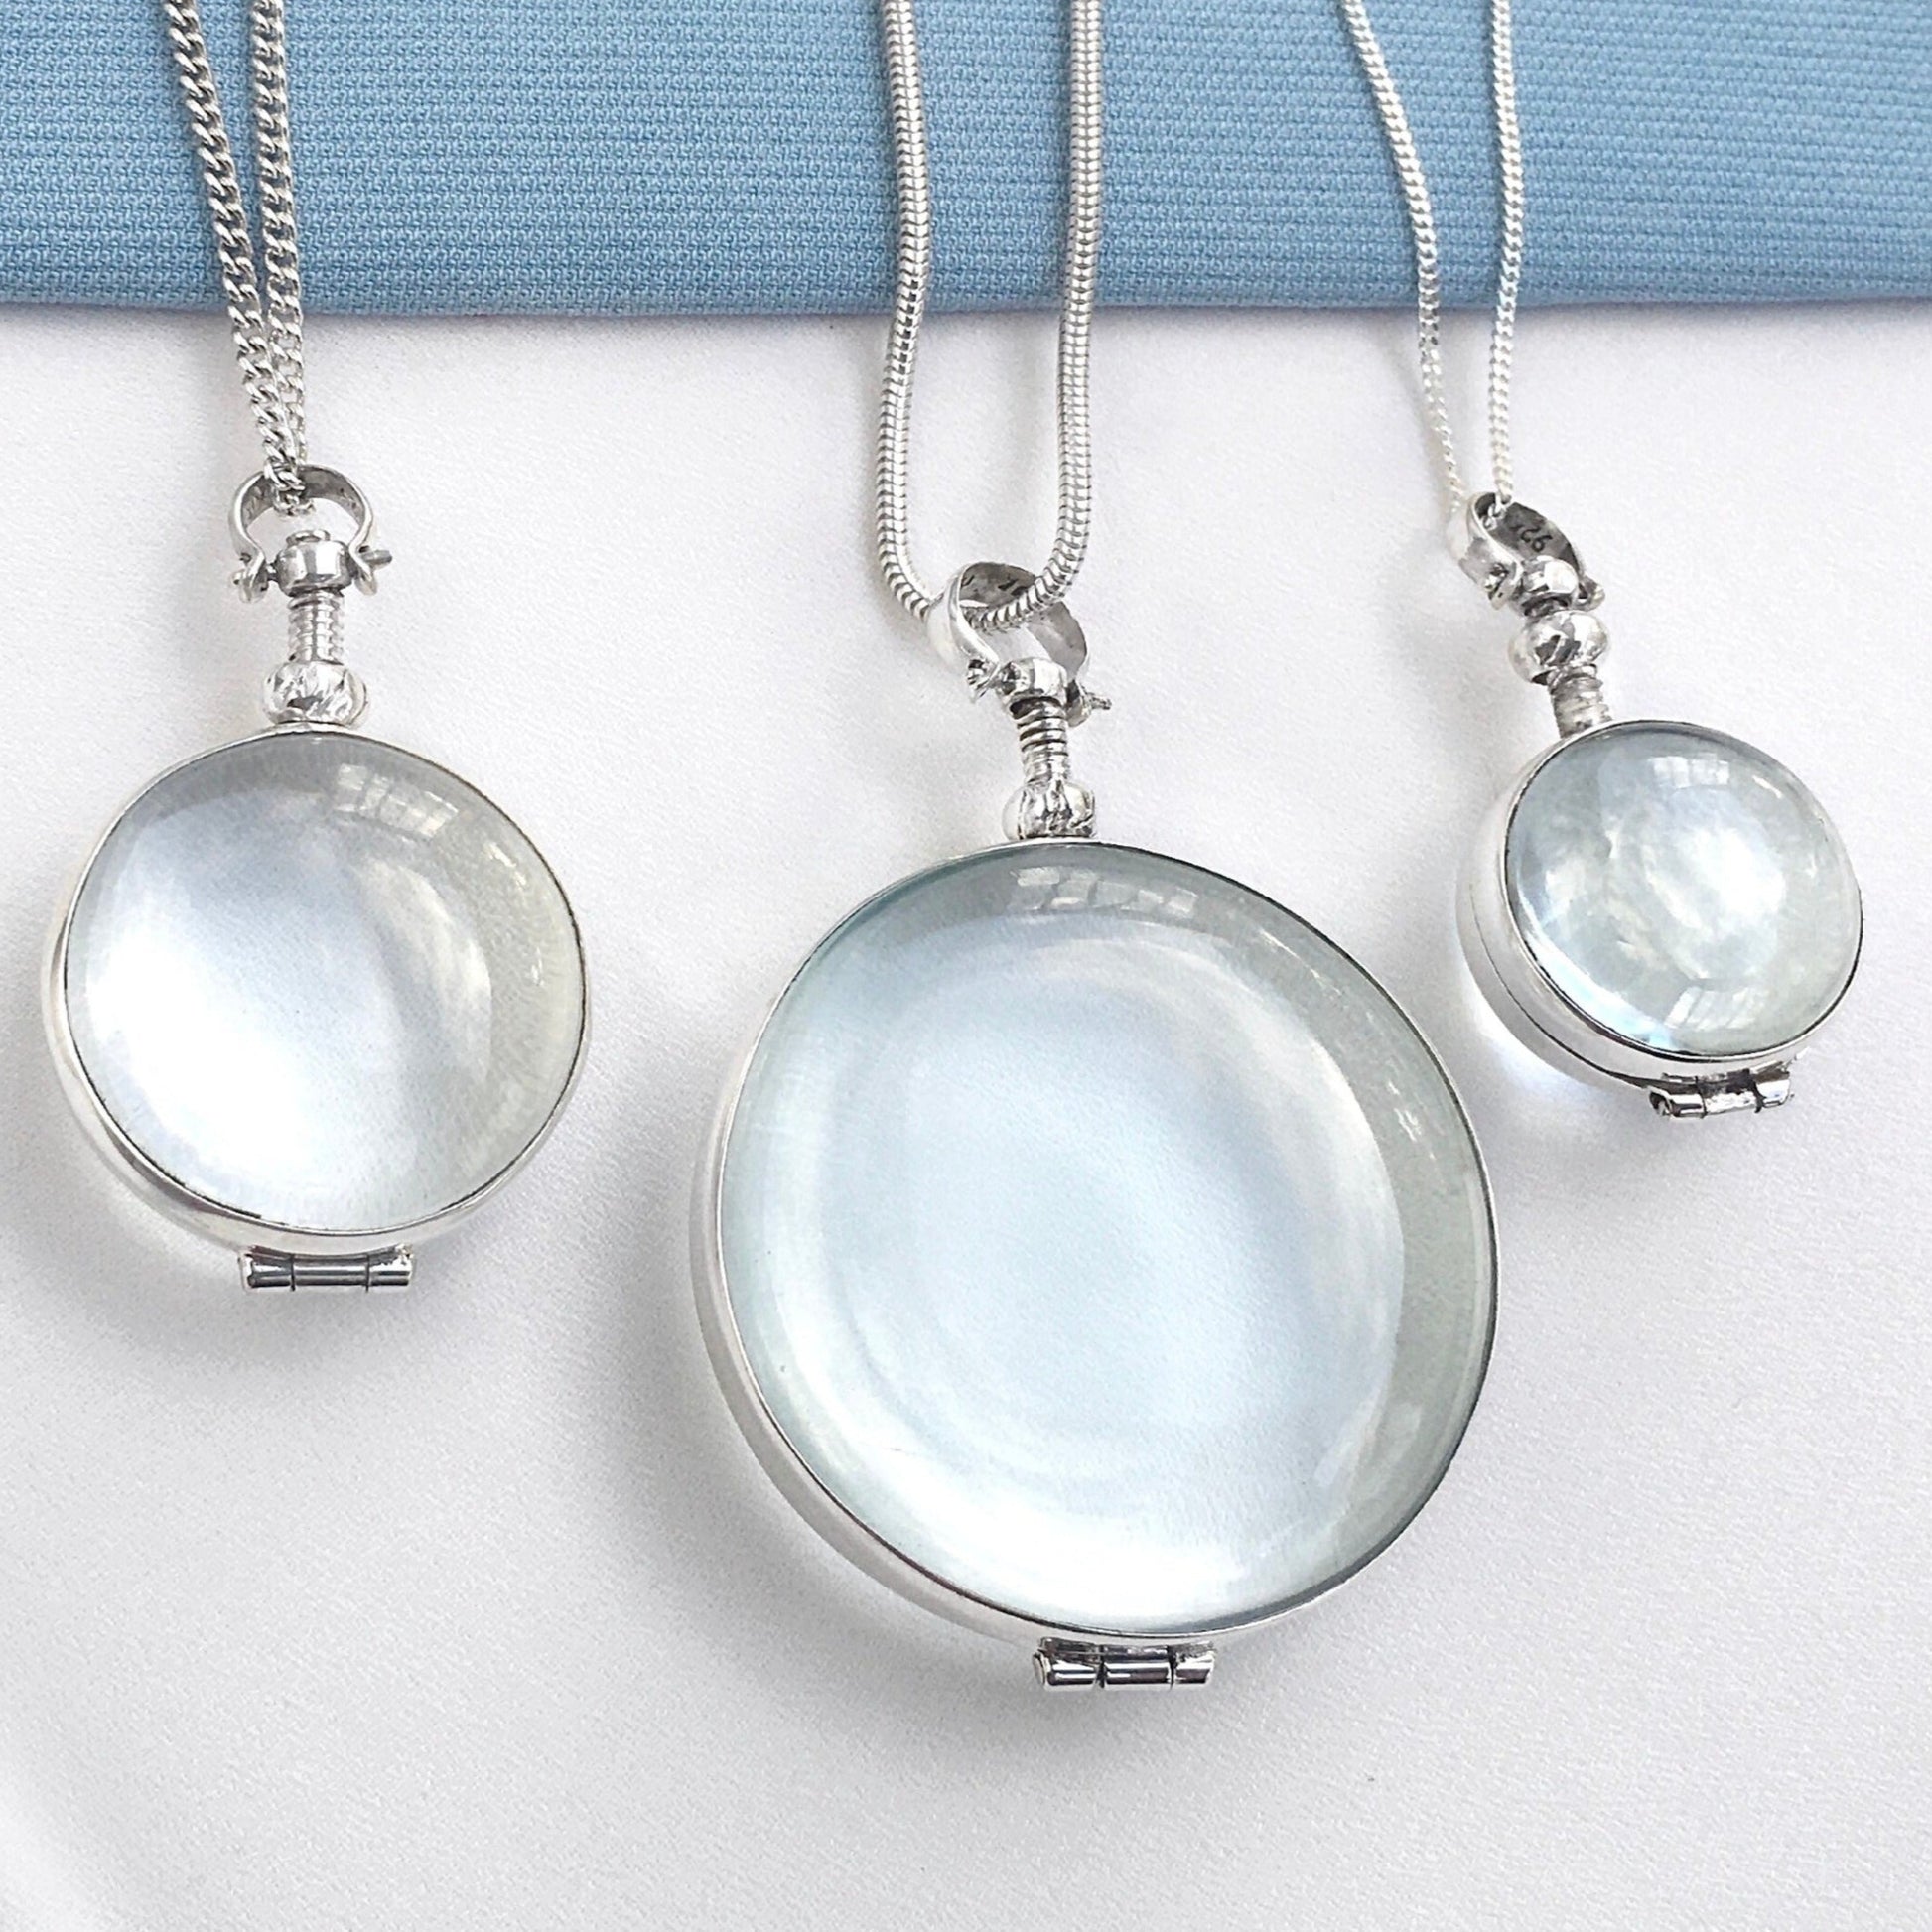 we sell our round lockets in small, medium and large sizes